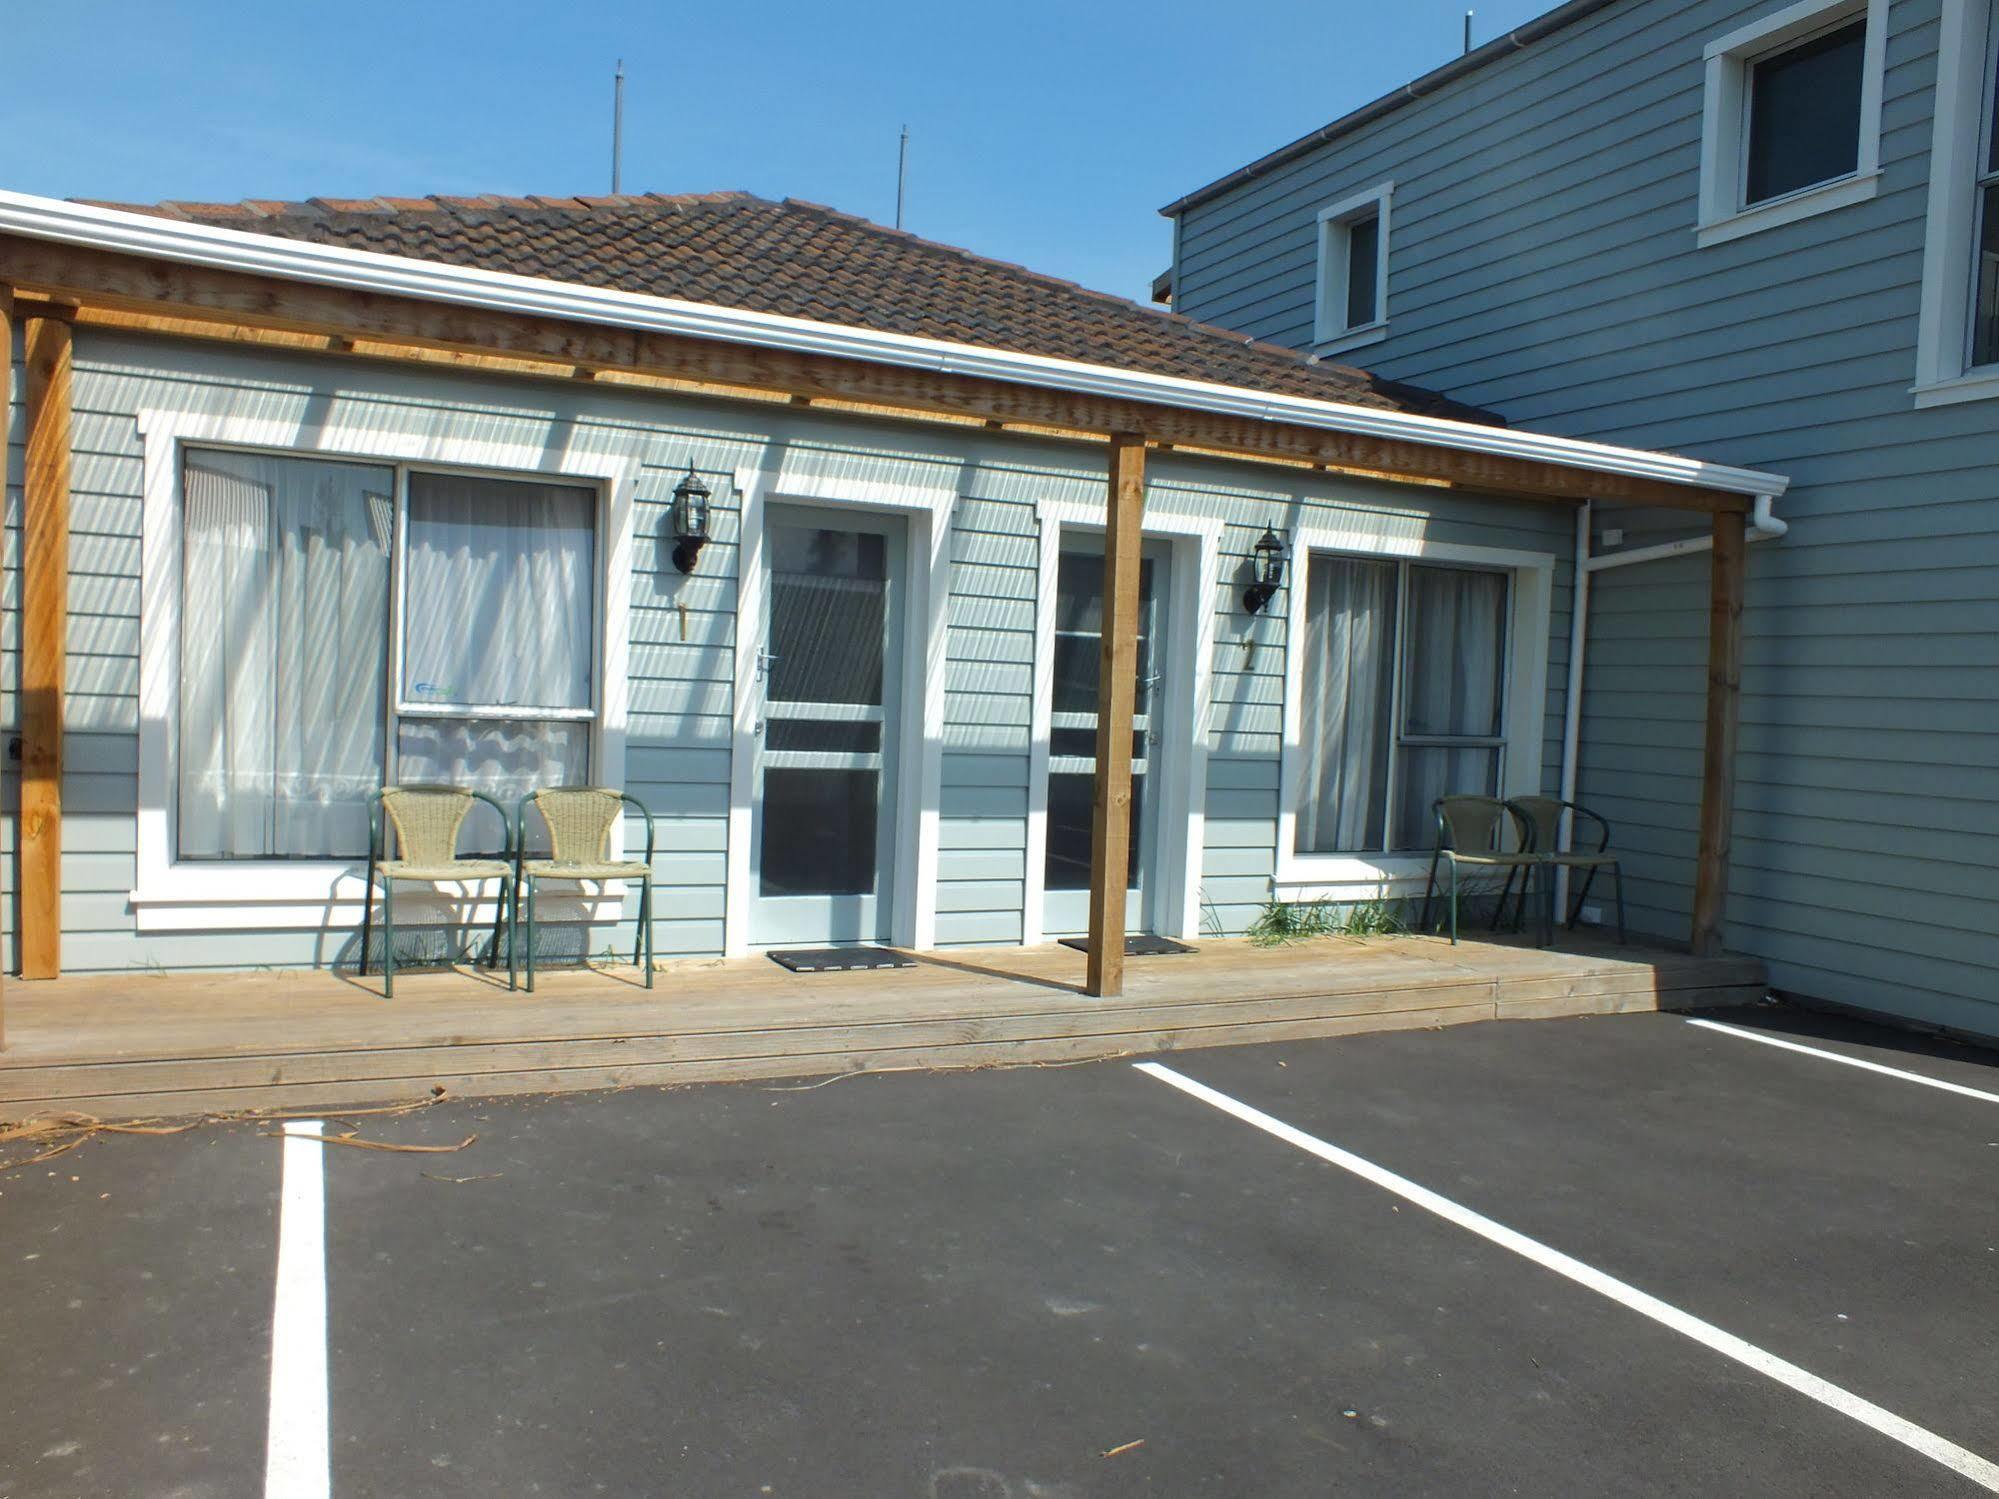 Cranford Cottages And Motel Christchurch Exterior photo